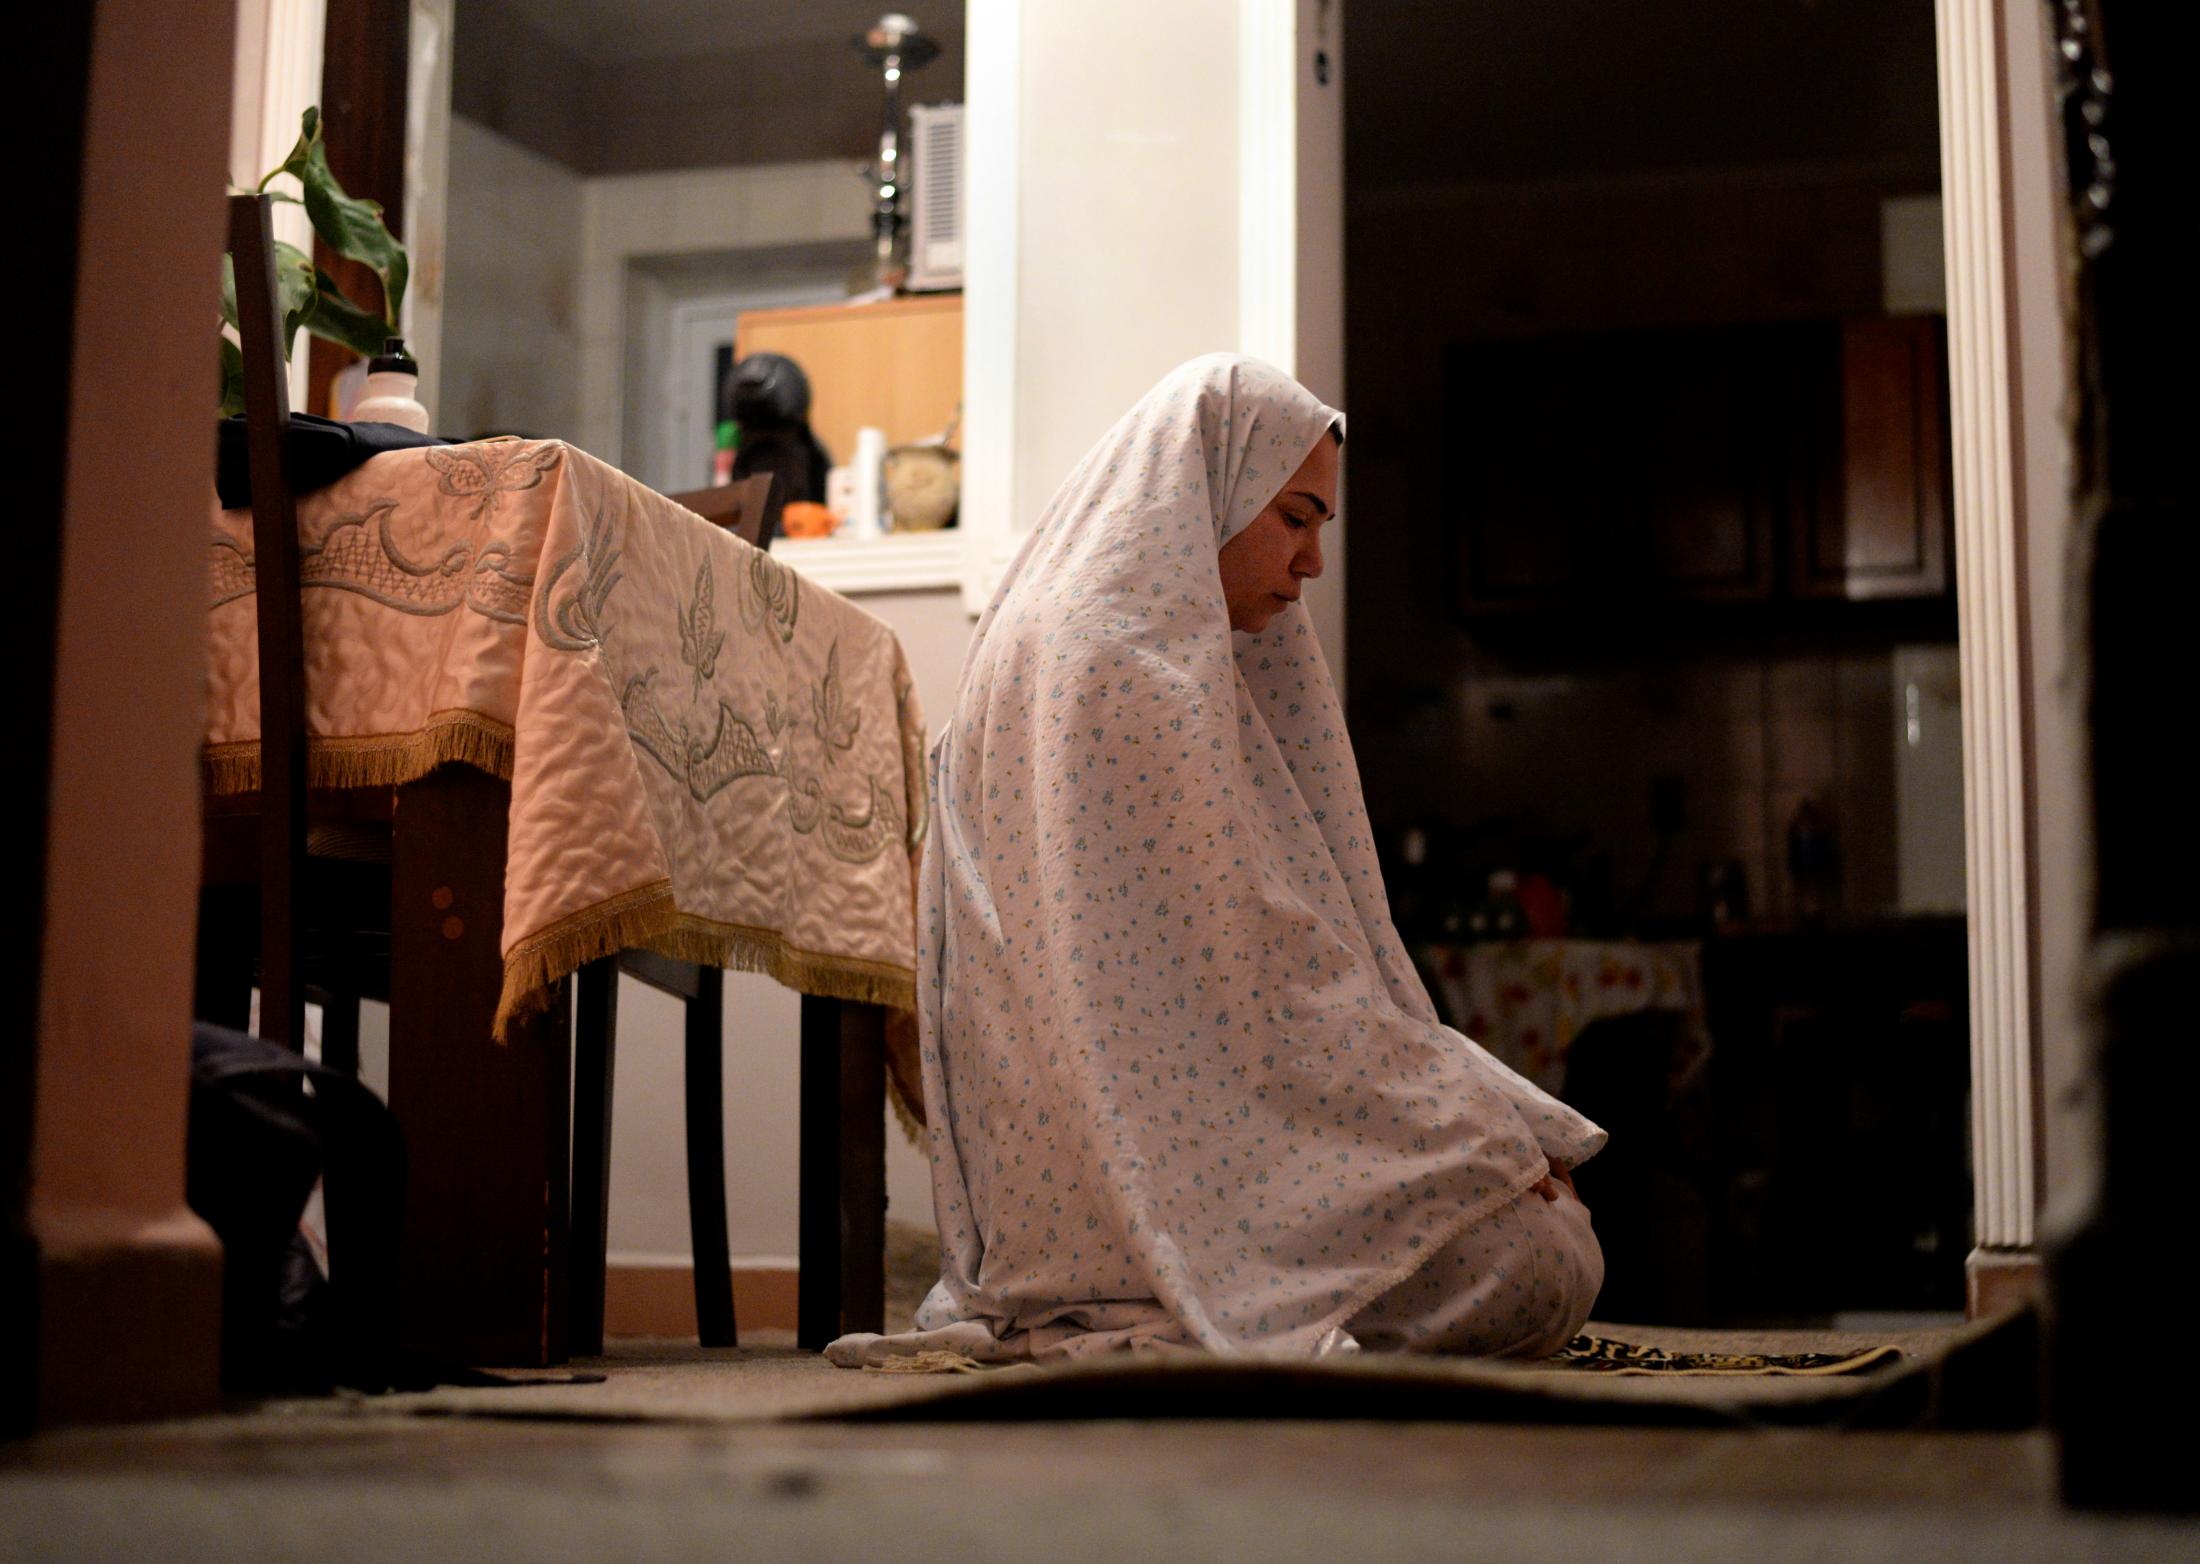 In Between Cultures - Rama AlOmari makes her first prayer before sunrise at her...